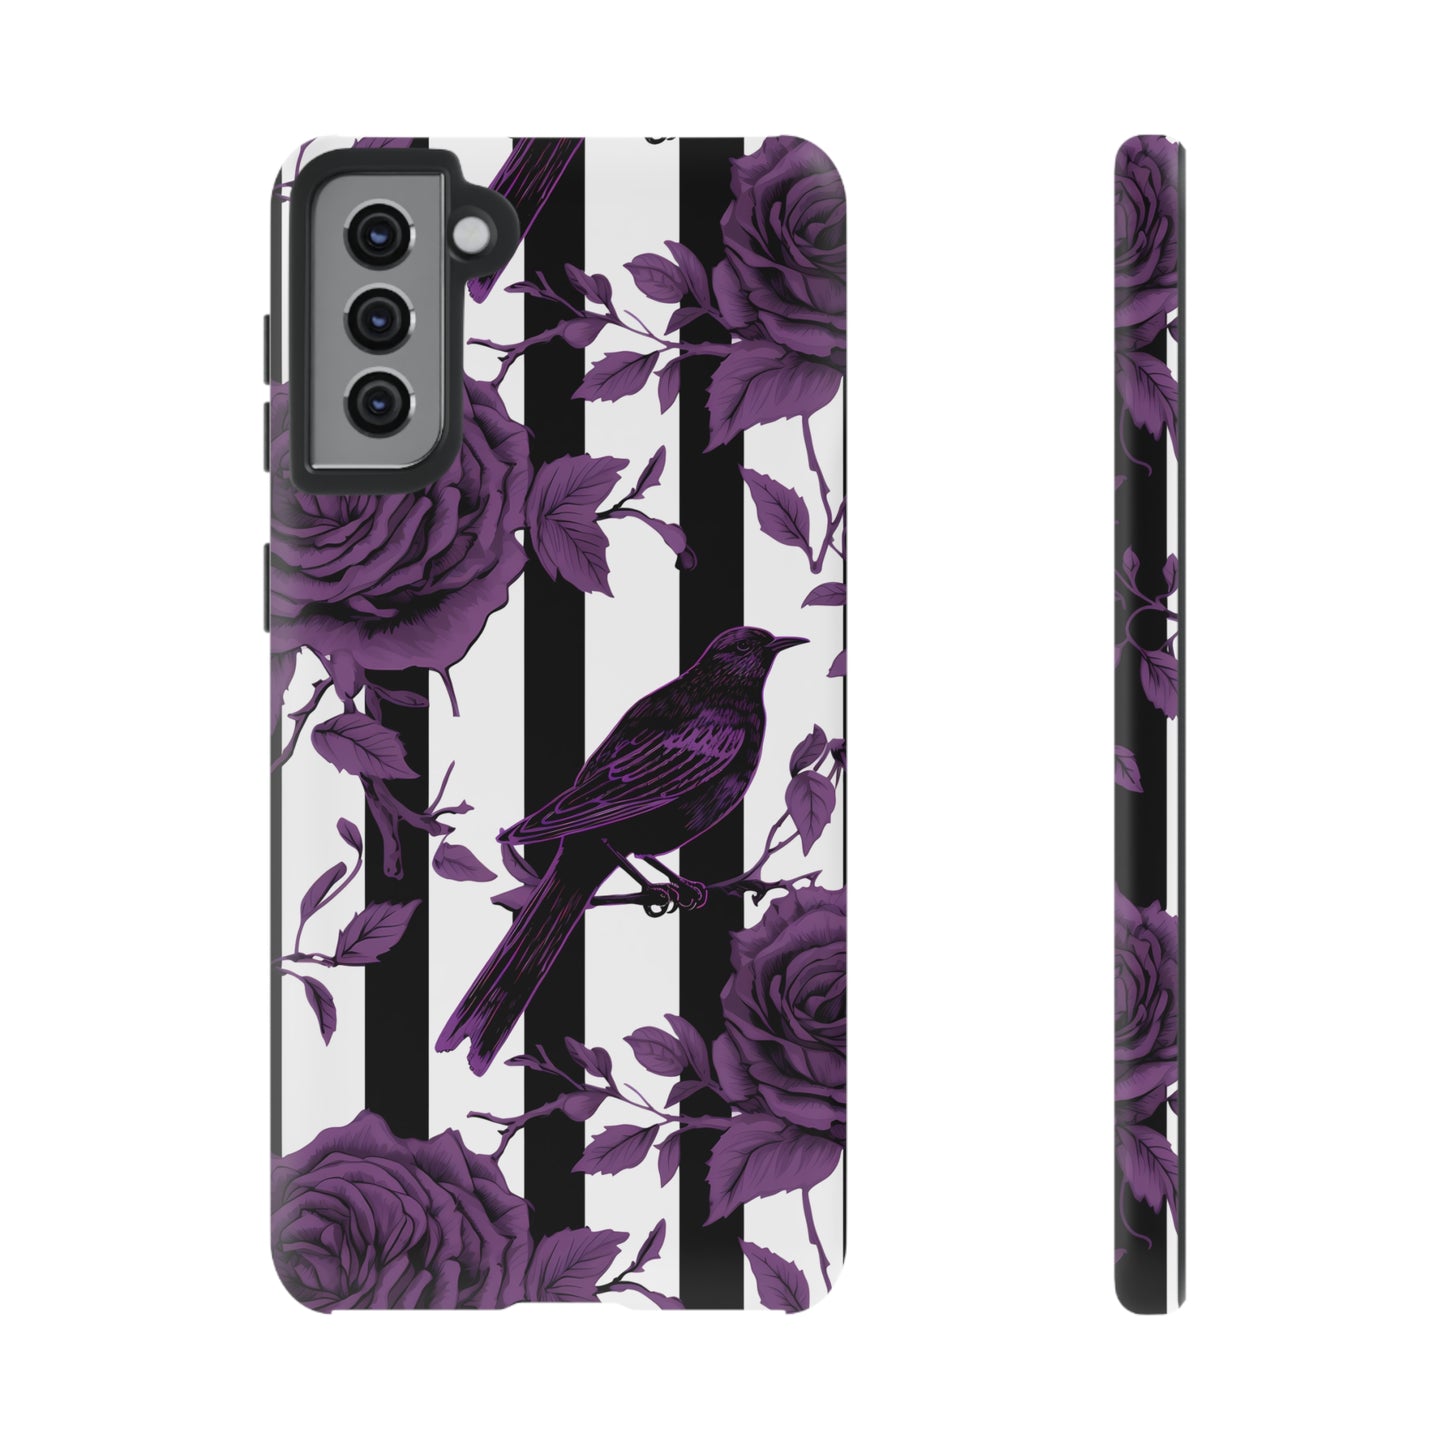 Striped Crows and Roses Tough Cases for iPhone Samsung Google PhonesPhone CaseVTZdesignsSamsung Galaxy S21 PlusMatteAccessoriescrowsGlossy